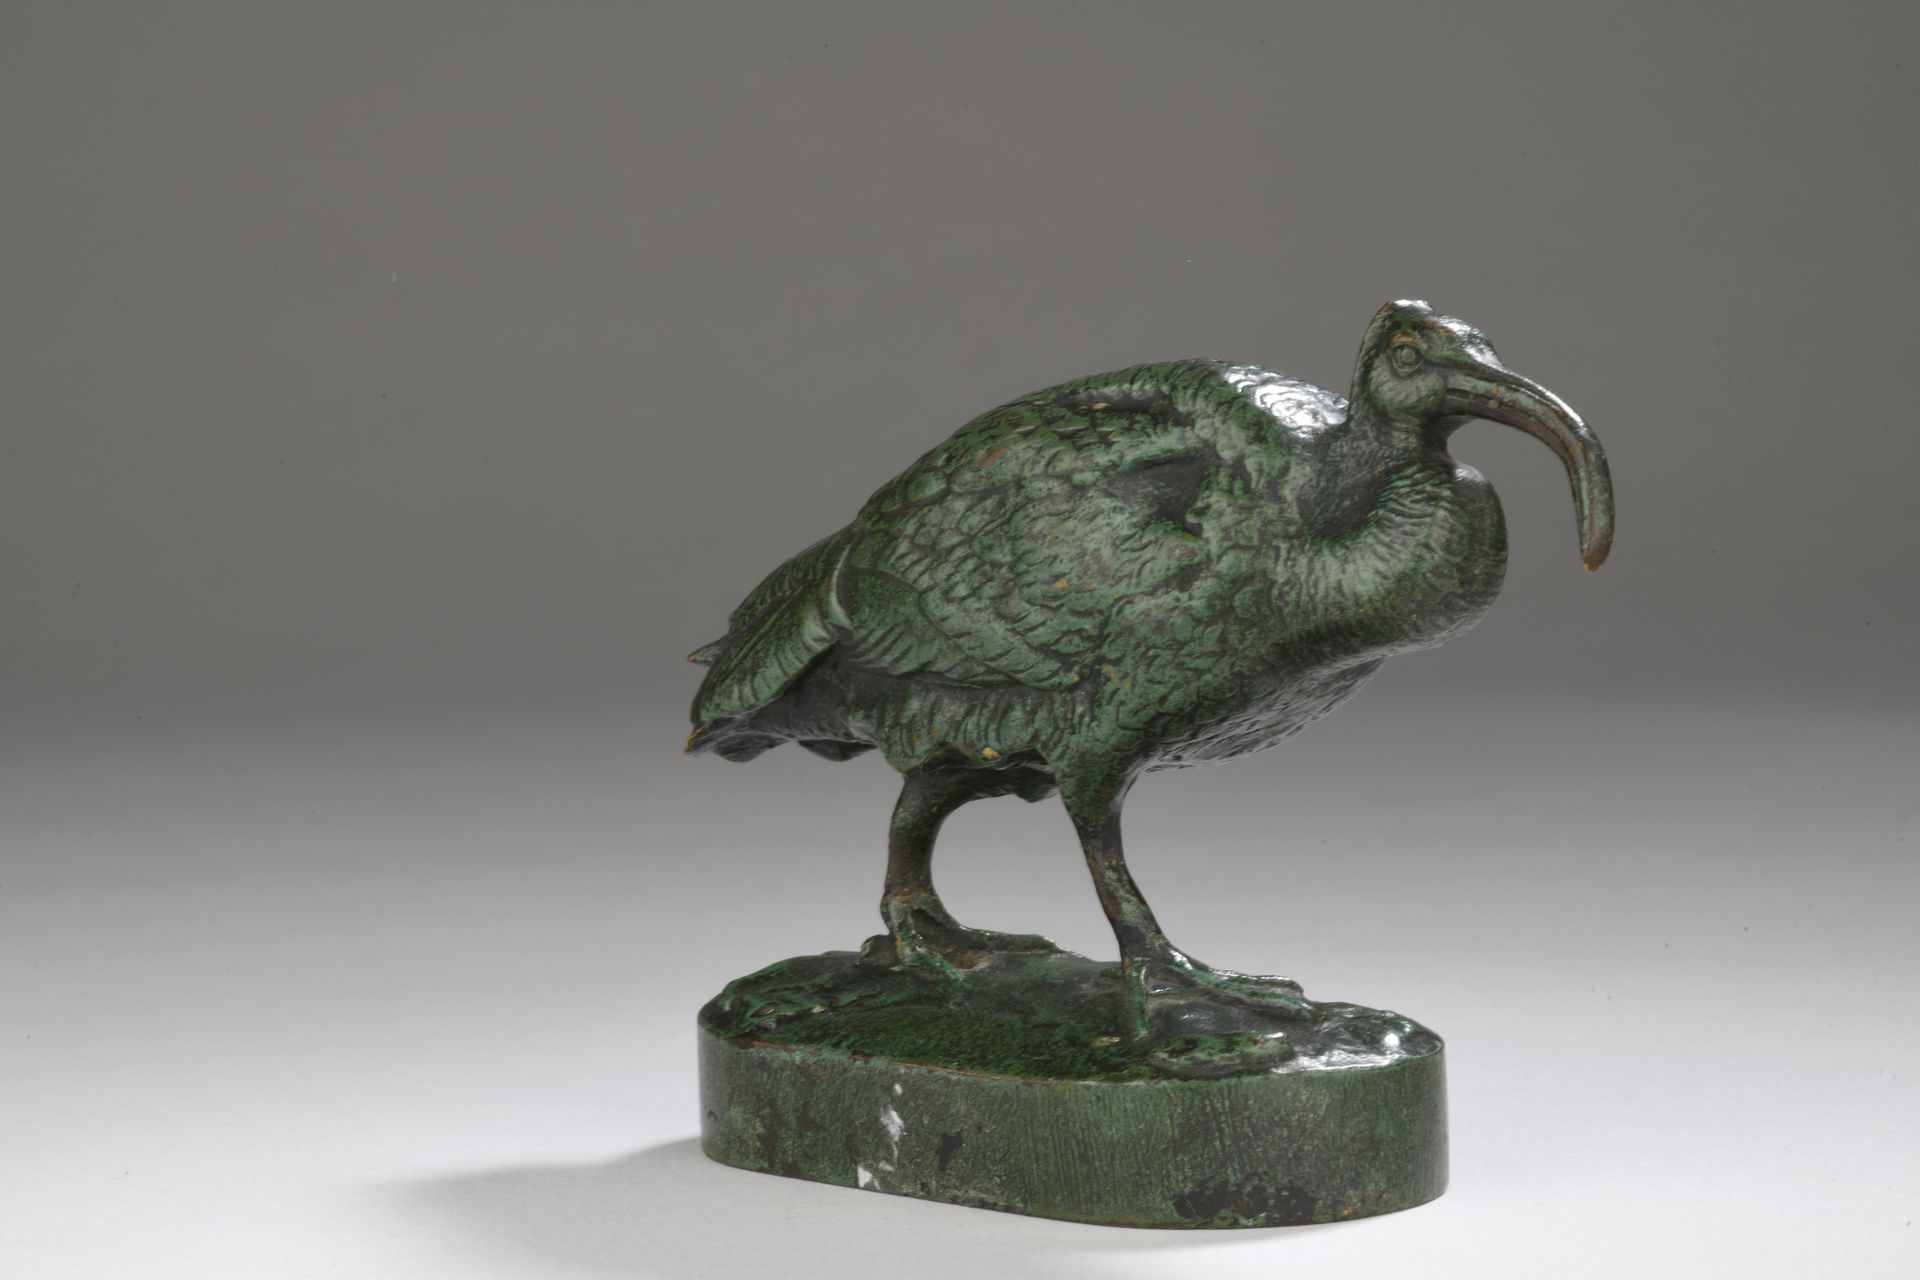 Null Henri-Alfred Jacquemart (1824-1896)
Ibis
Bronze with green patina
Signed "A&hellip;